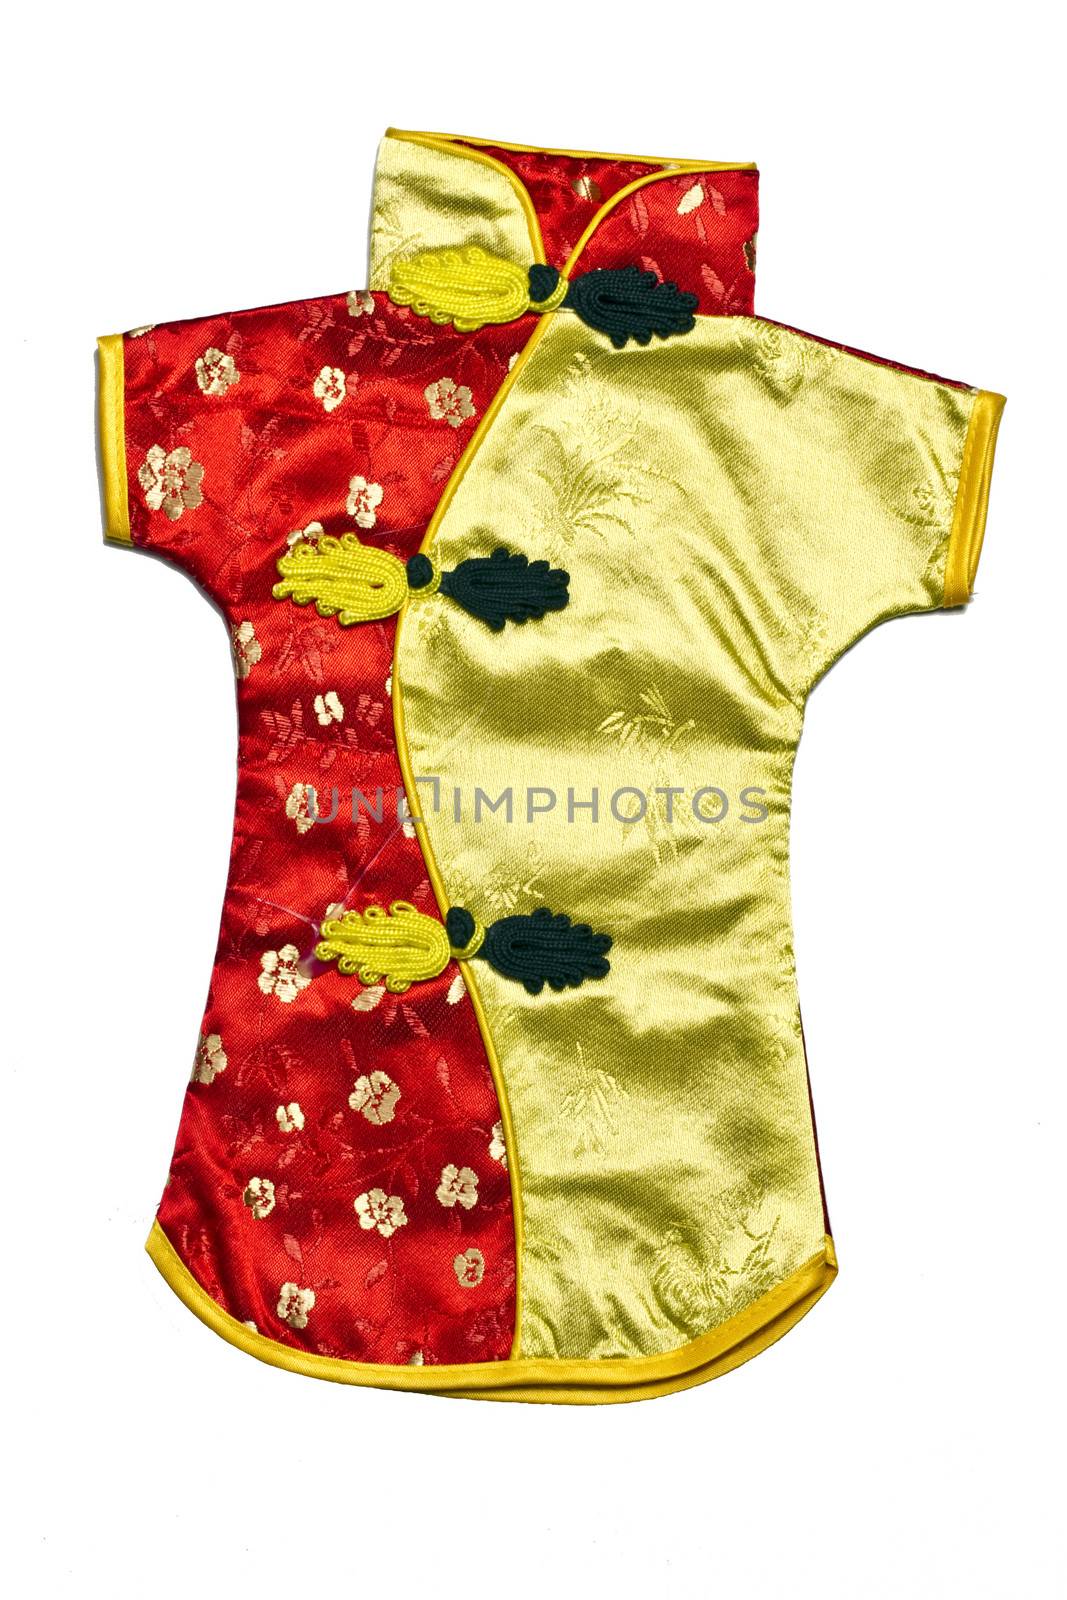 Mini traditional Chinese Costume for women by ibphoto